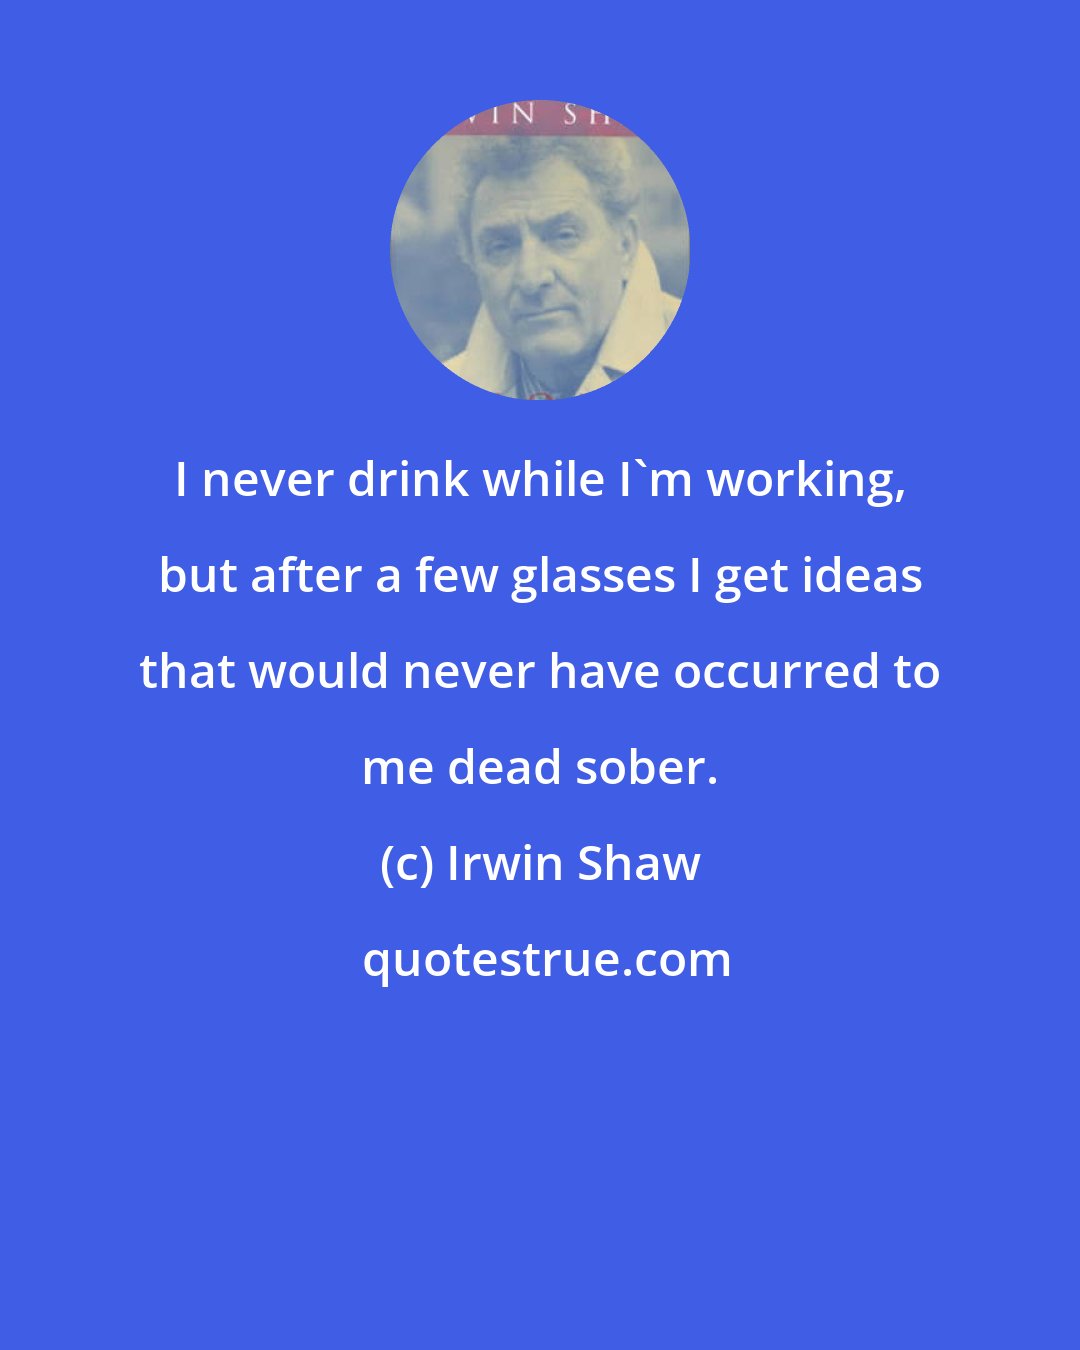 Irwin Shaw: I never drink while I'm working, but after a few glasses I get ideas that would never have occurred to me dead sober.